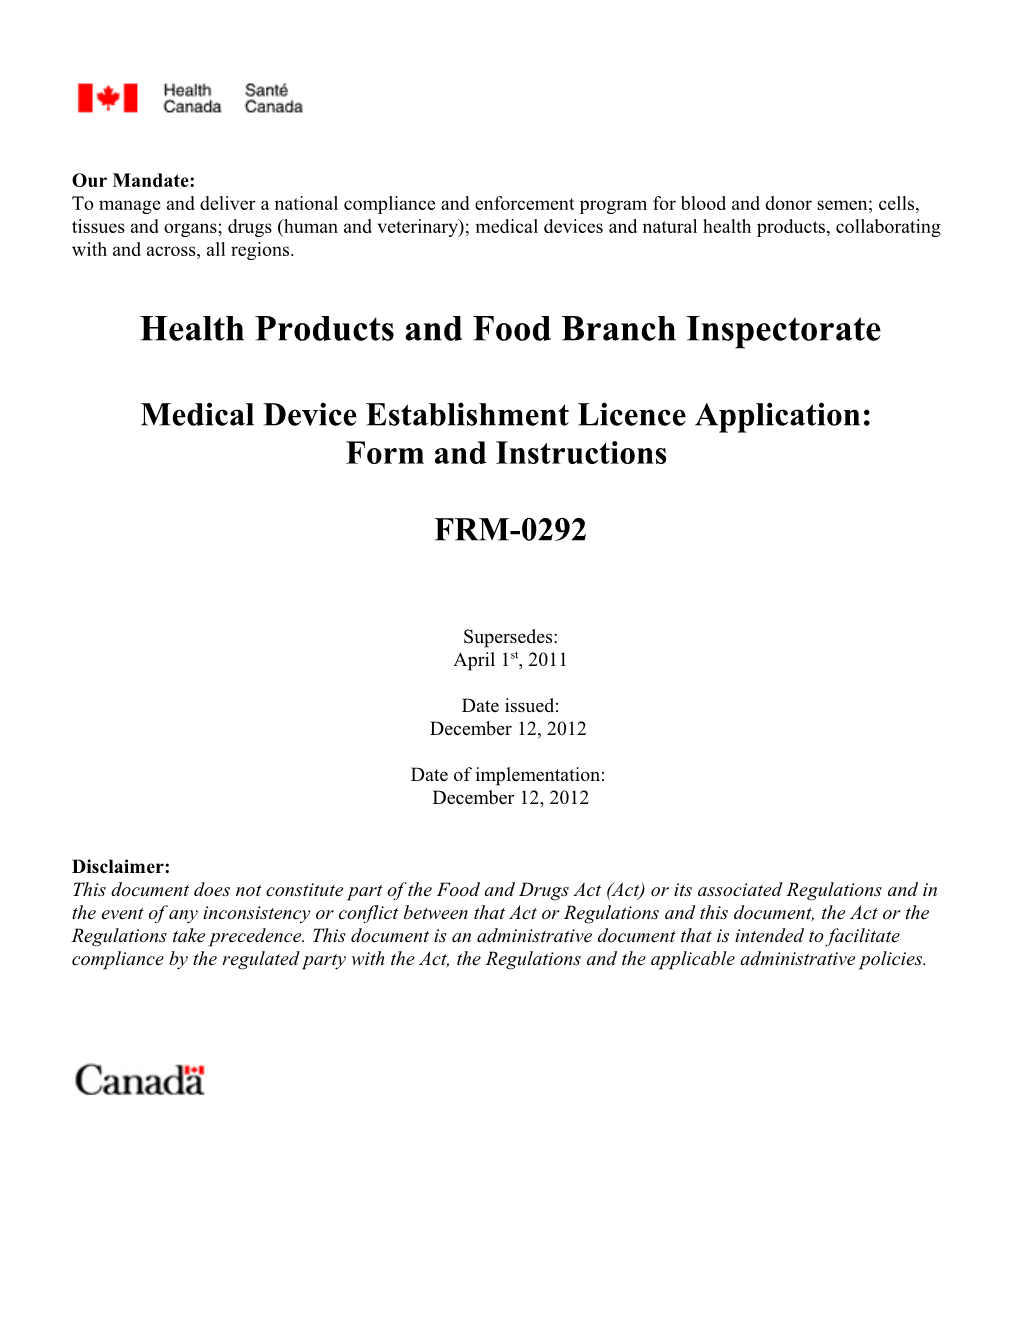 Health Products and Food Branch Inspectorate